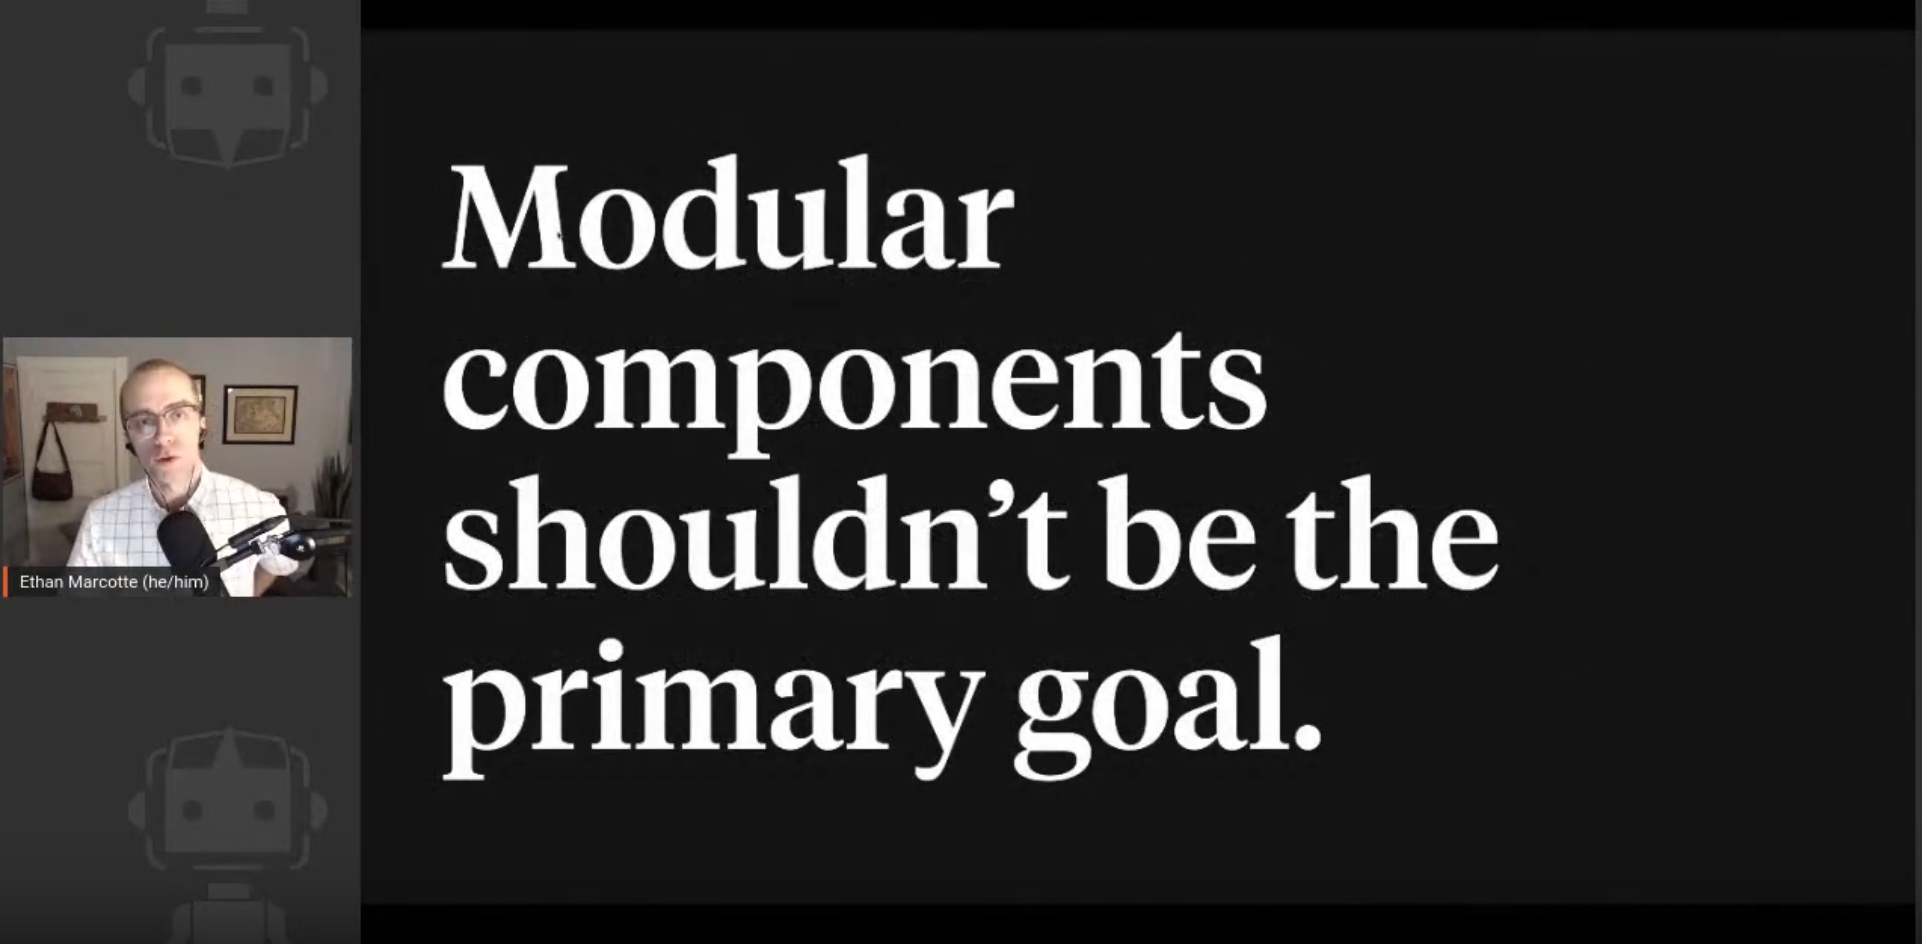 Ethan Marcotte next to Slide "Modular components shouldn't be the primary goal"